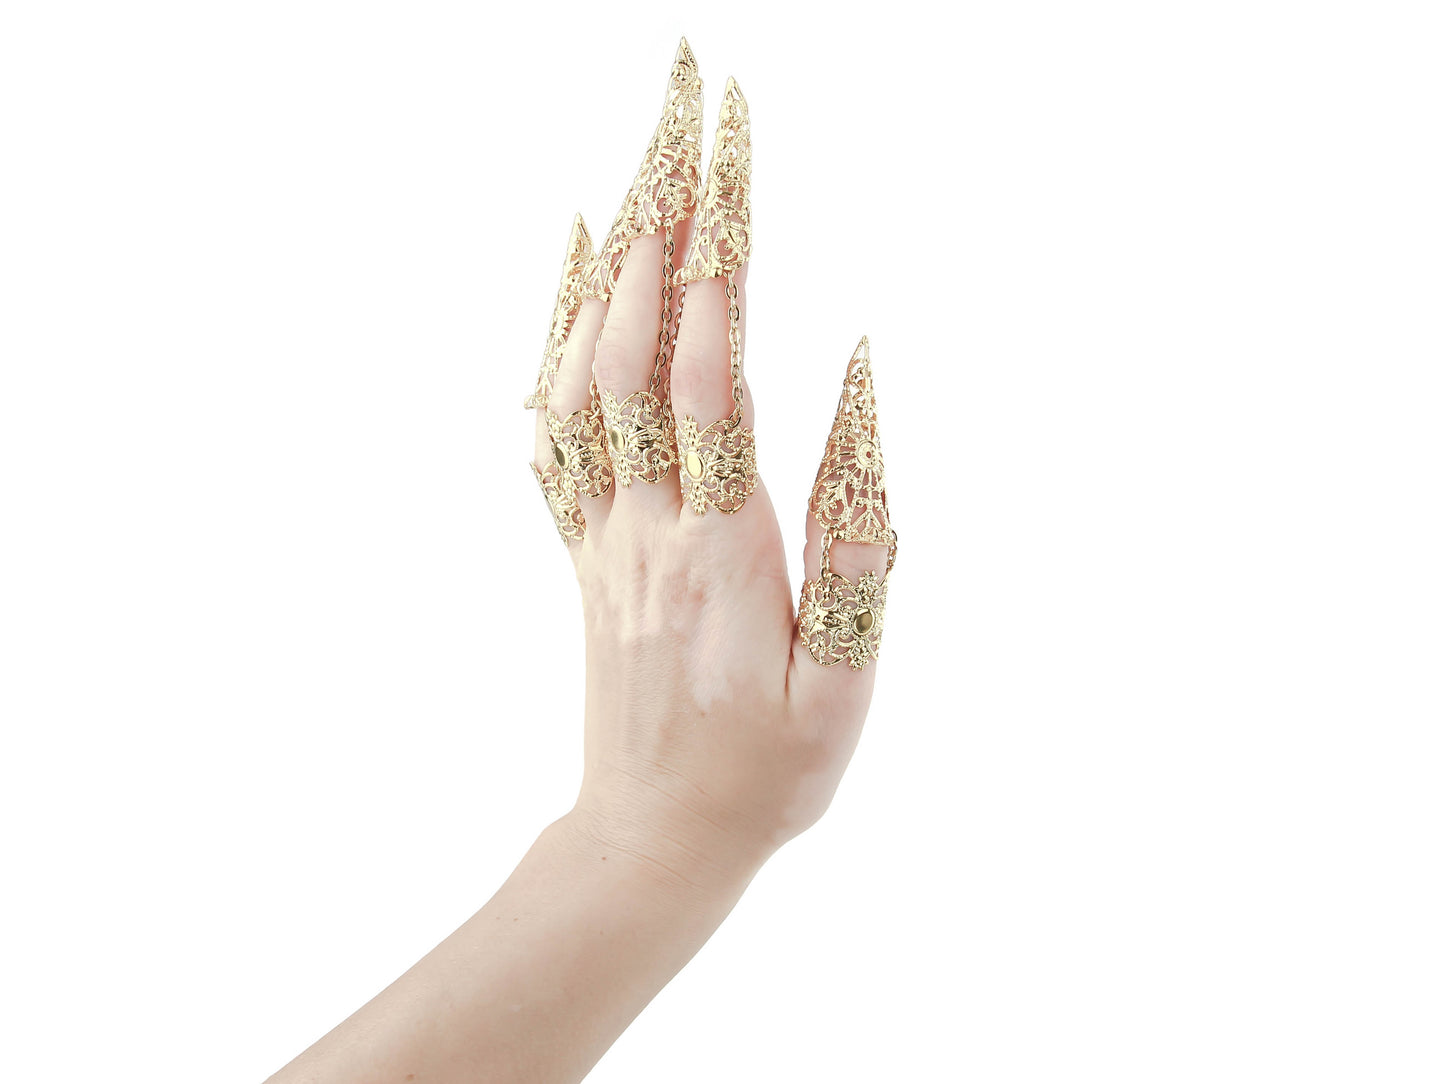 A hand elegantly displays Myril Jewels' full set of intricate gold rings with nail claws, perfect for neo-gothic style enthusiasts. The exquisite craftsmanship is ideal for Halloween, punk fashion statements, or as a standout accessory for whimsigoth and witchcore looks, also making a memorable gift for a goth girlfriend.